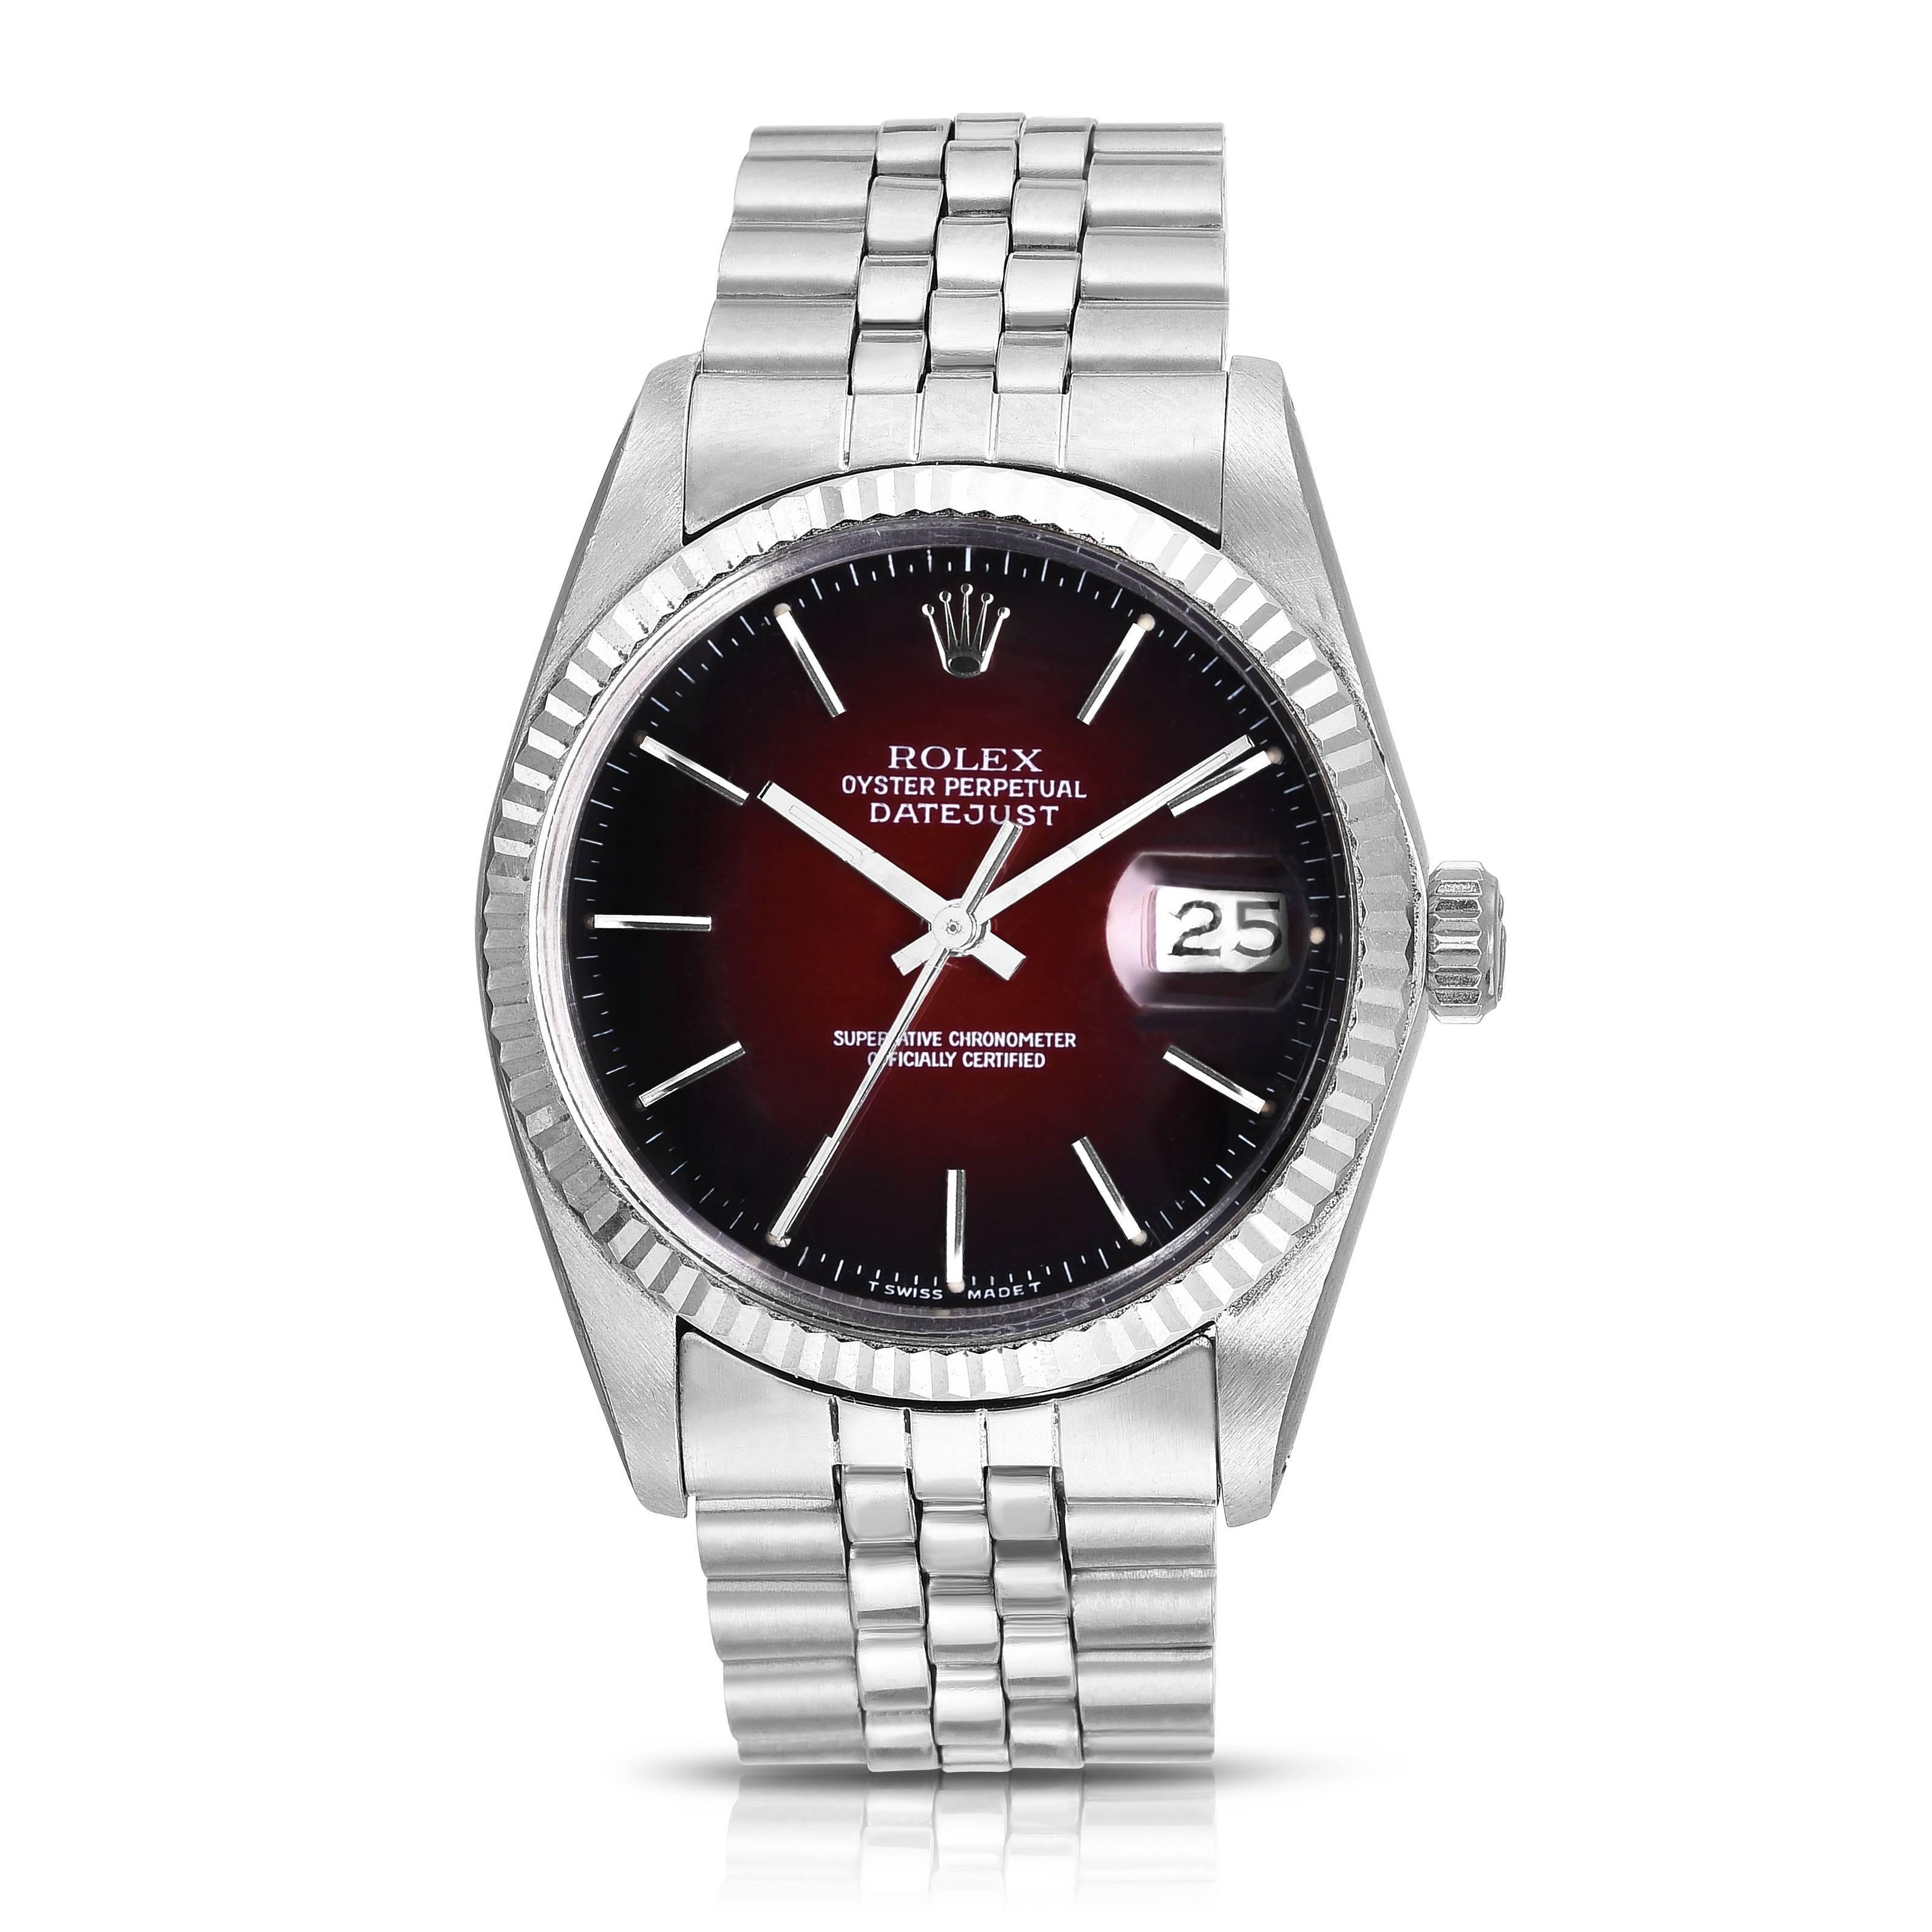 Vintage Rolex Stainless Steel and 18K White Gold Oyster Perpetual Datejust
Rare Factory Red Vignette Degrade Dial
18K White Gold Fluted Bezel
36mm in size
1984 Production
Quick-Set Date Function
Comes Fitted on a Factory Rolex Jubilee